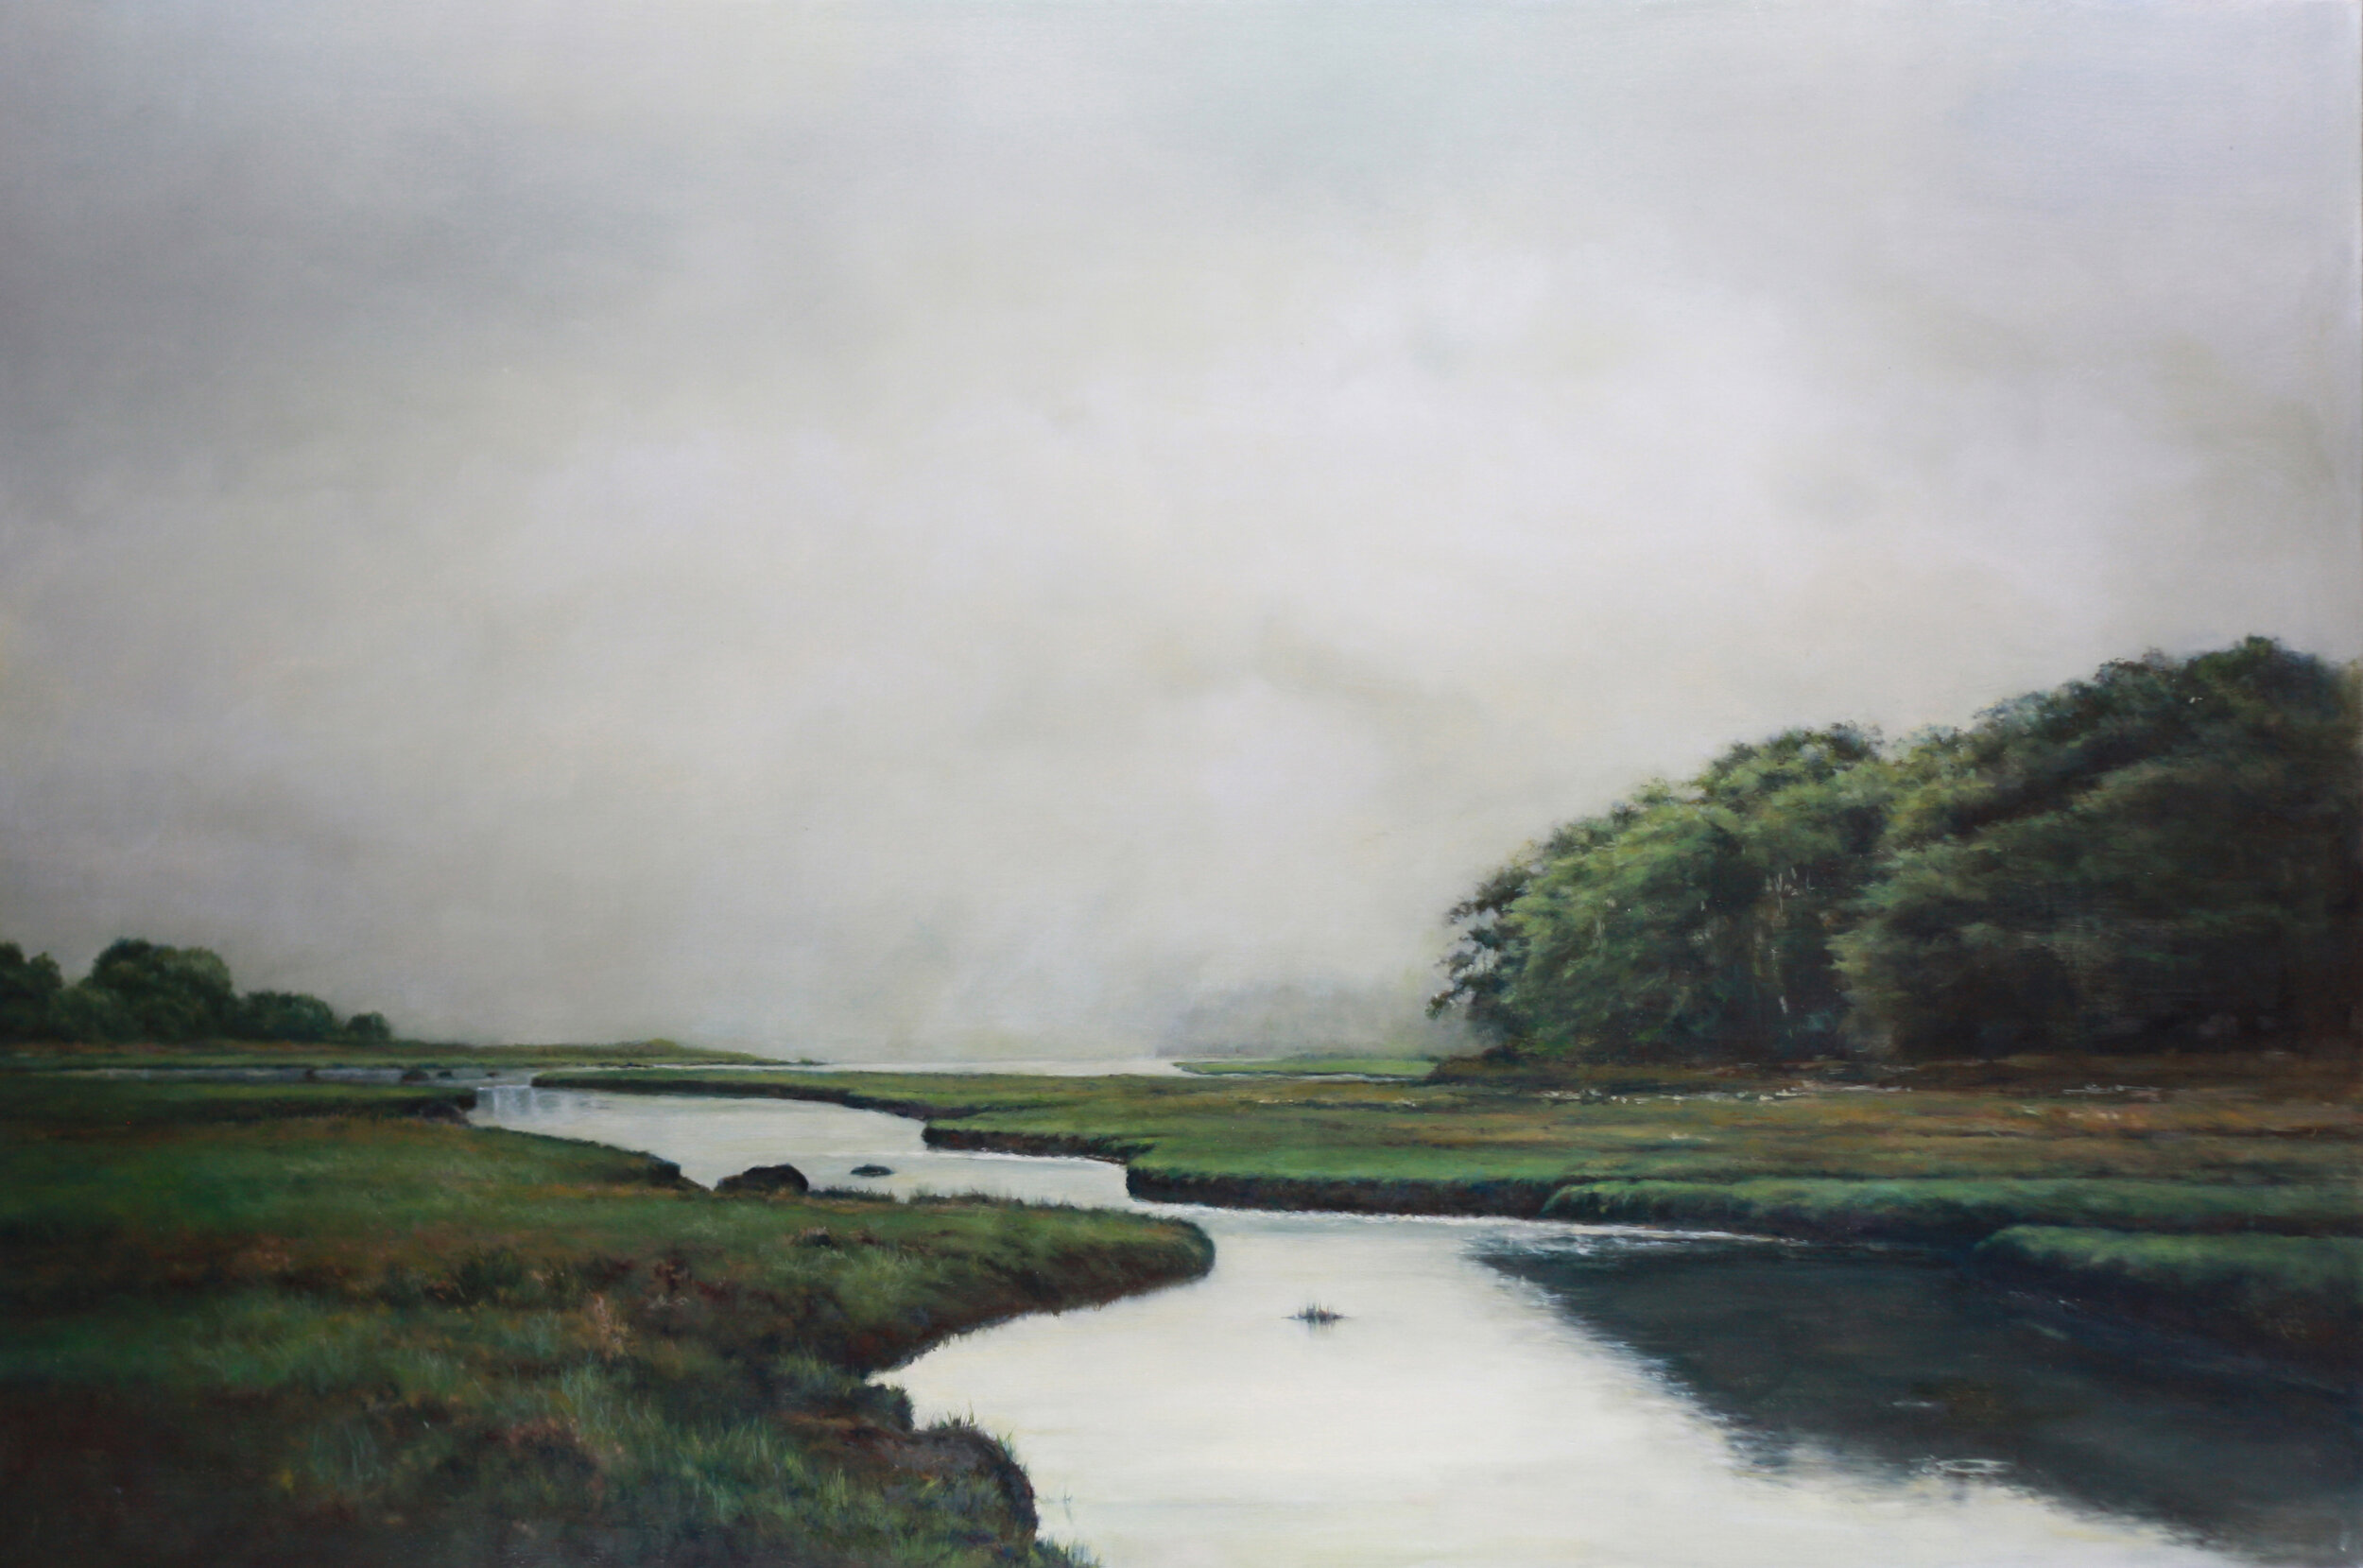  Mary Lou Schempf  Barn Island Fog,  24” x 36”, oil on canvas   (private collection)  